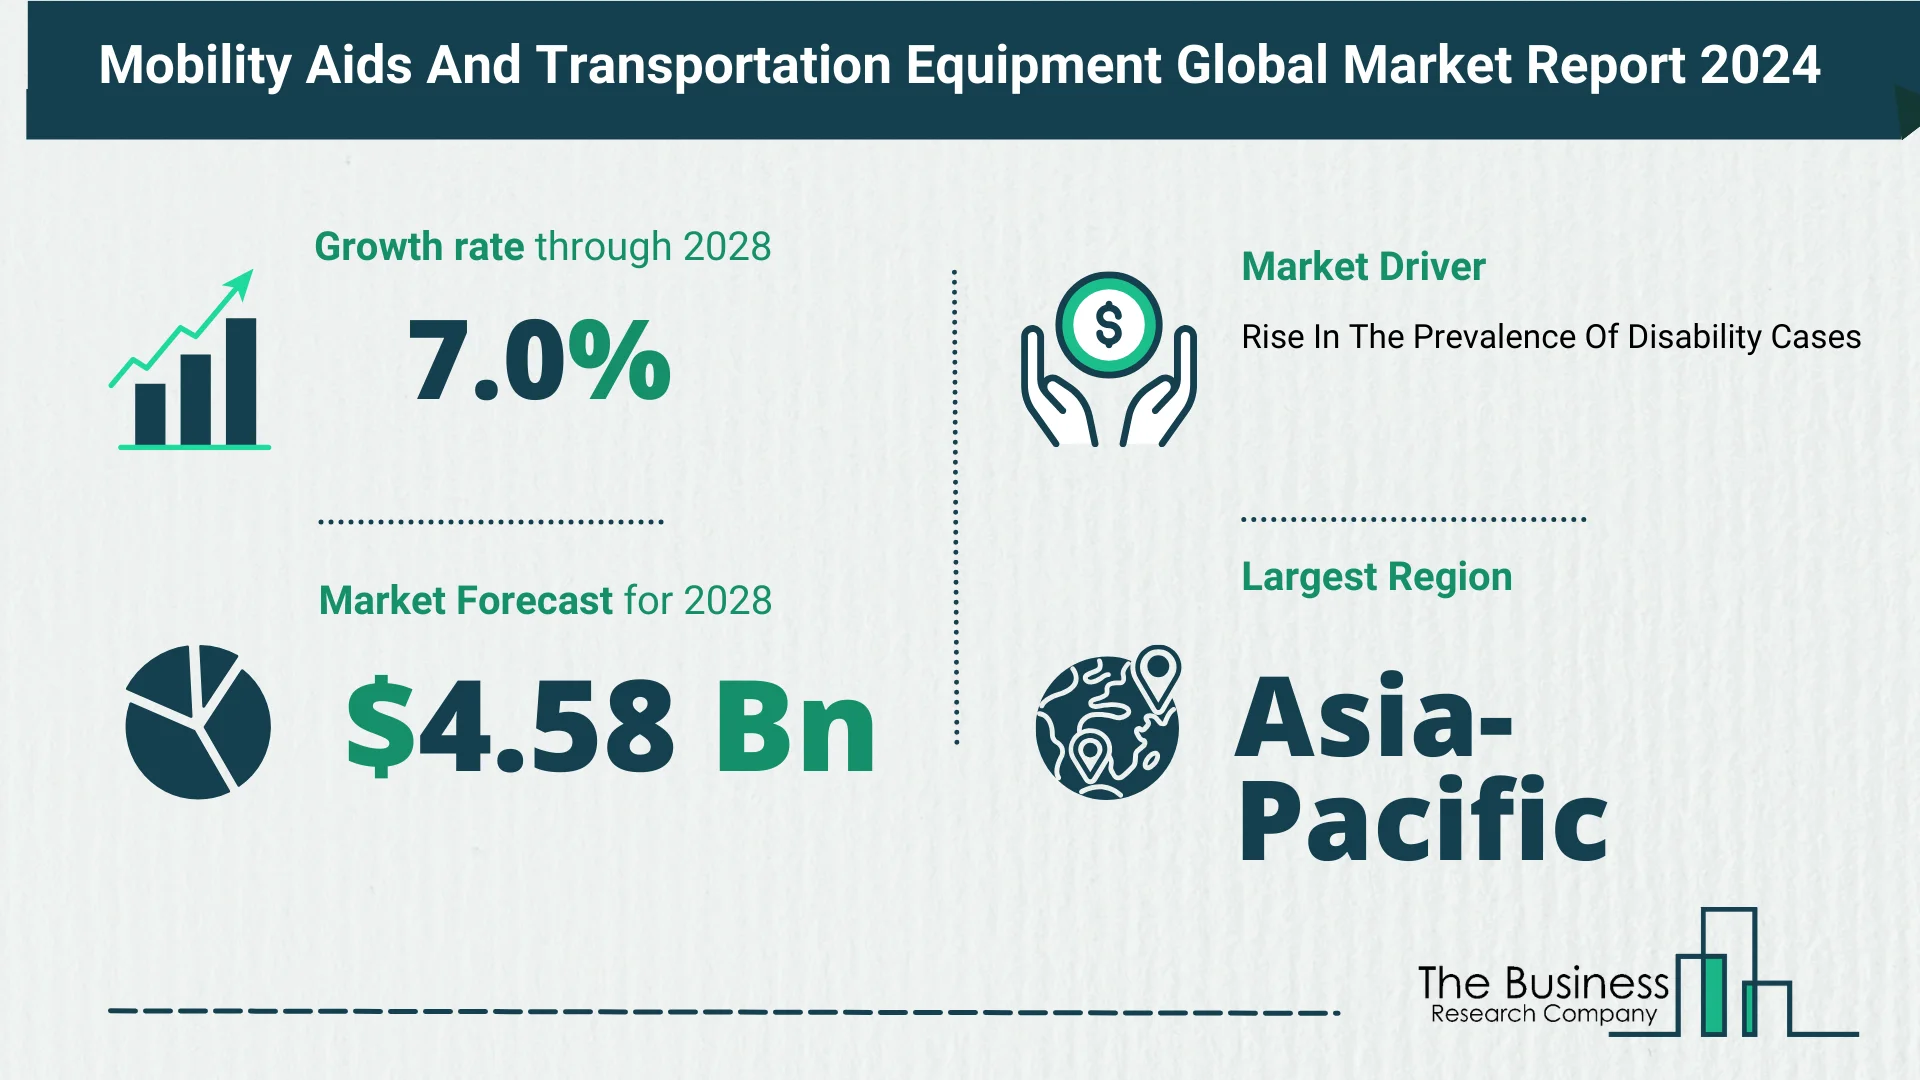 Mobility Aids And Transportation Equipment Market Report 2024: Market Size, Drivers, And Trends